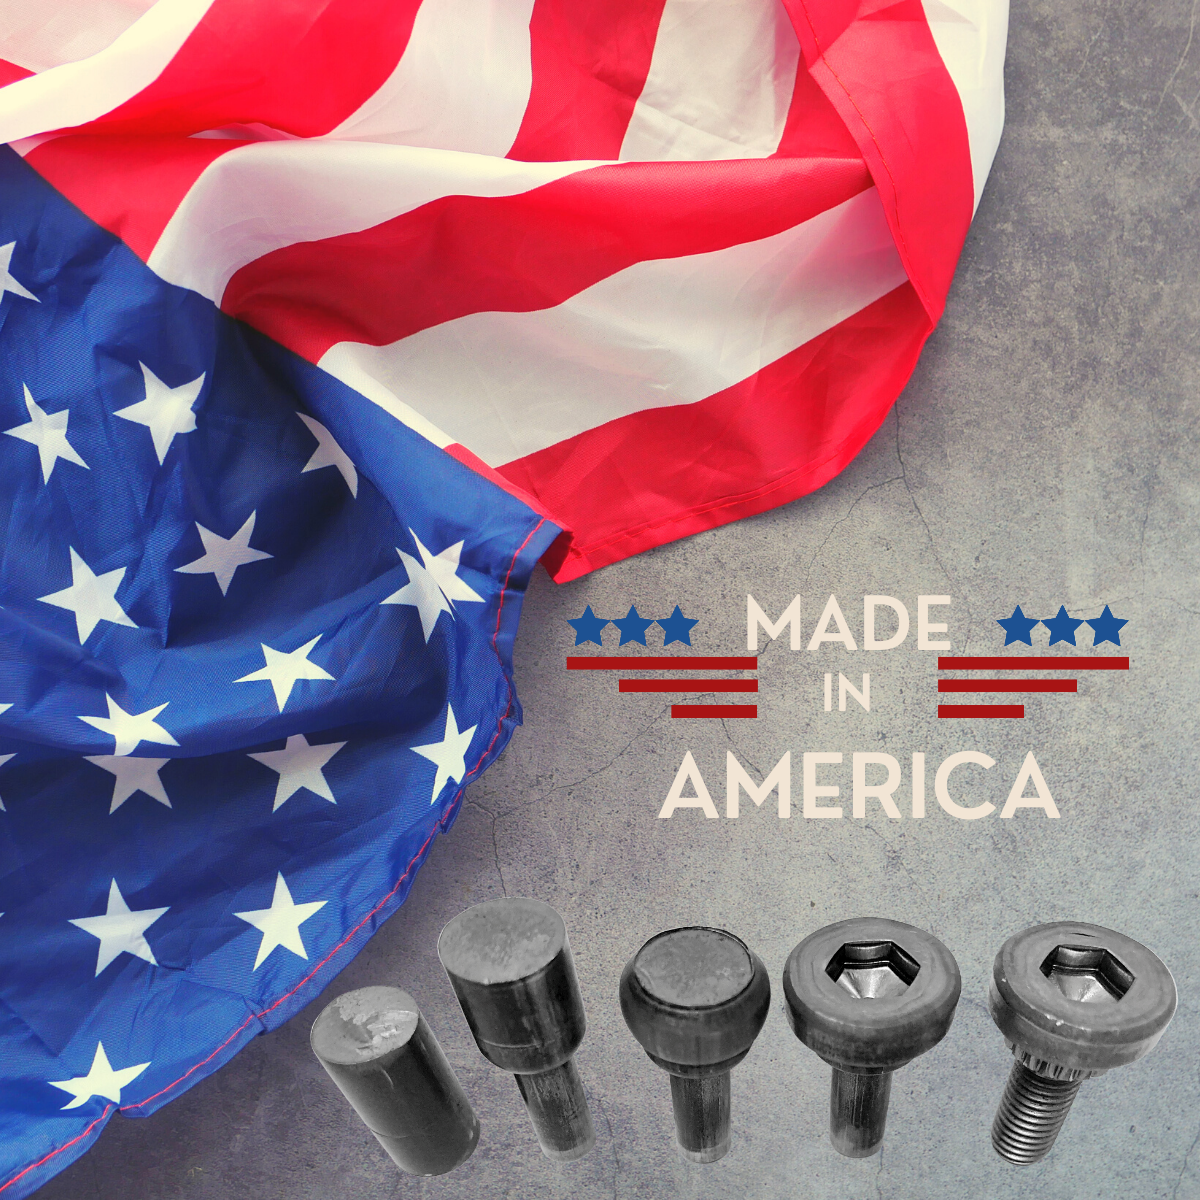 American Flag, Fastener Manufacturer in the USA